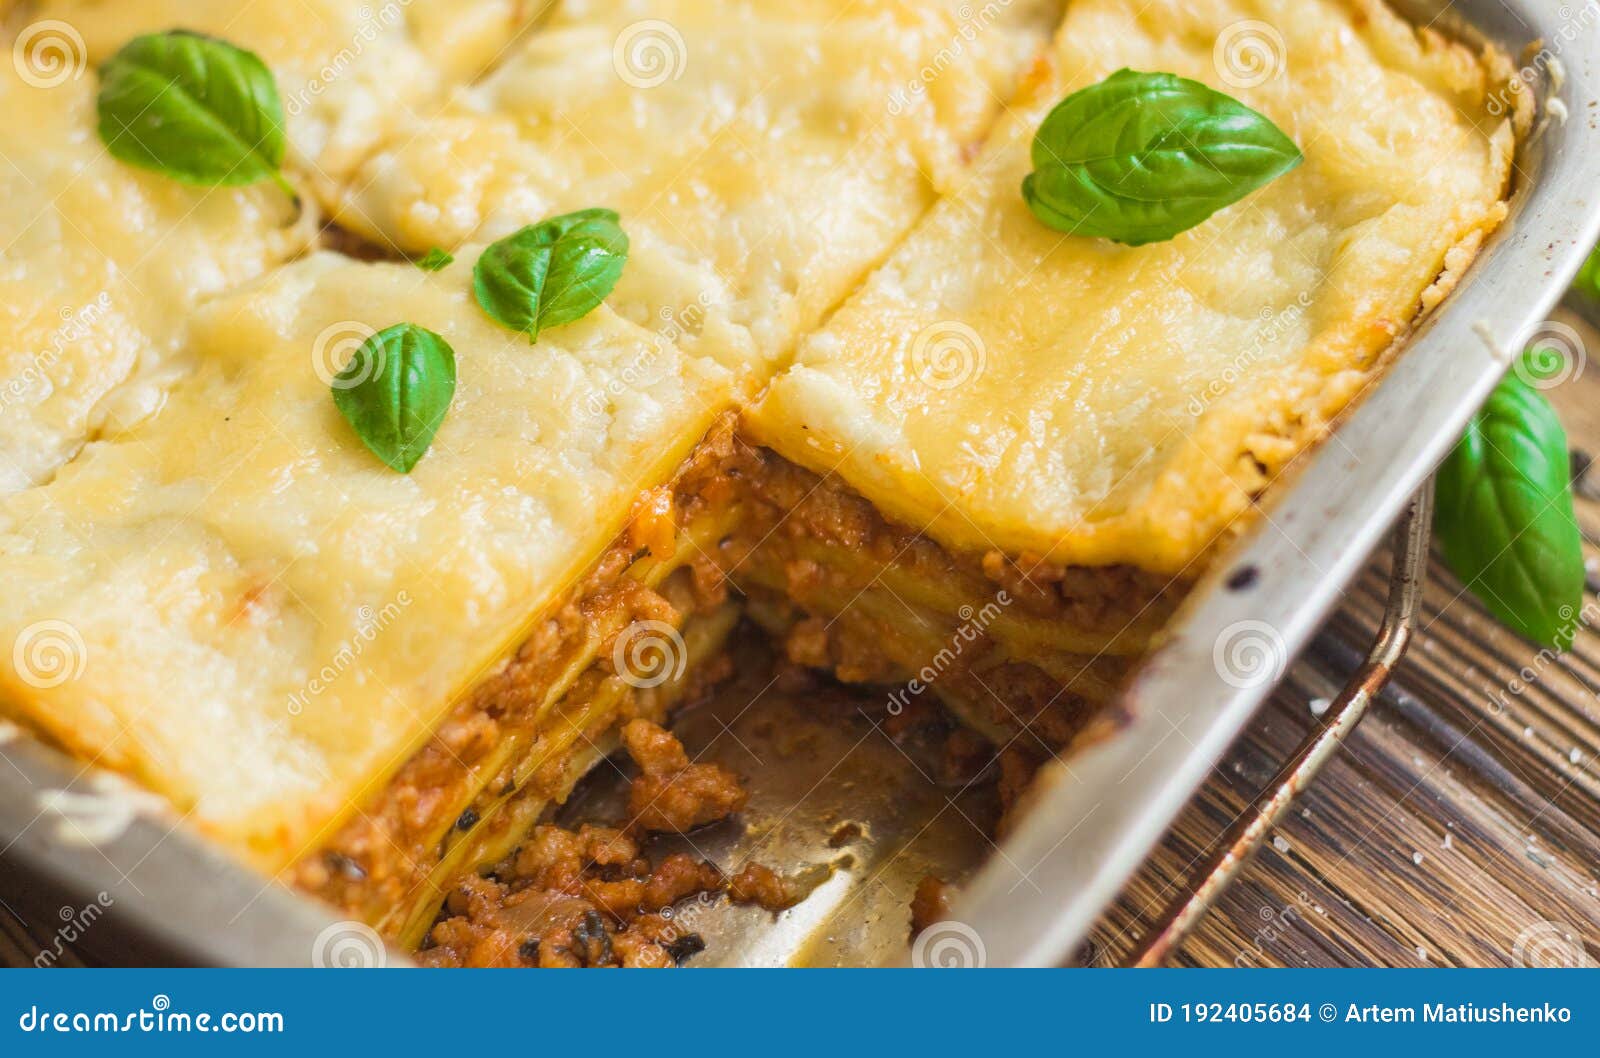 Homemade Lasagna Ready To Eat in Metal Baking Tray Served with Basil ...